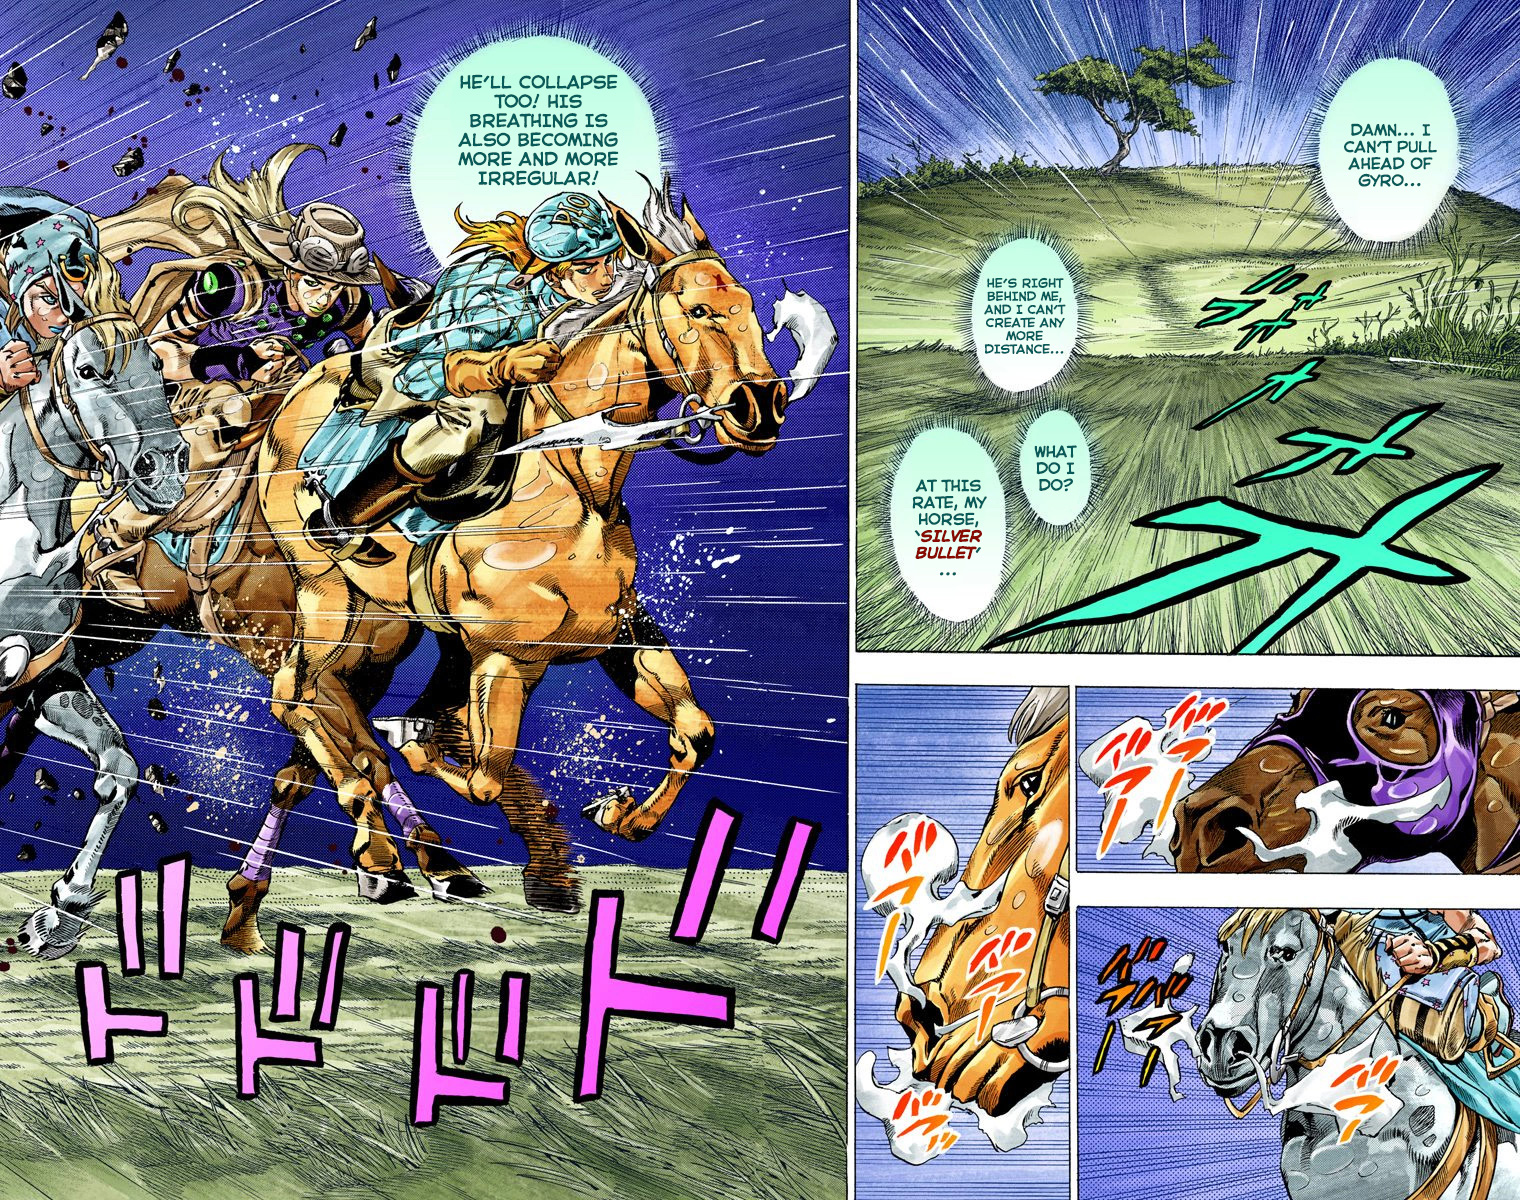 Jojo's Bizarre Adventure Part 7 - Steel Ball Run Vol.9 Chapter 39: Catch The Rainbow (On That Stormy Night) Part 2 - Picture 3